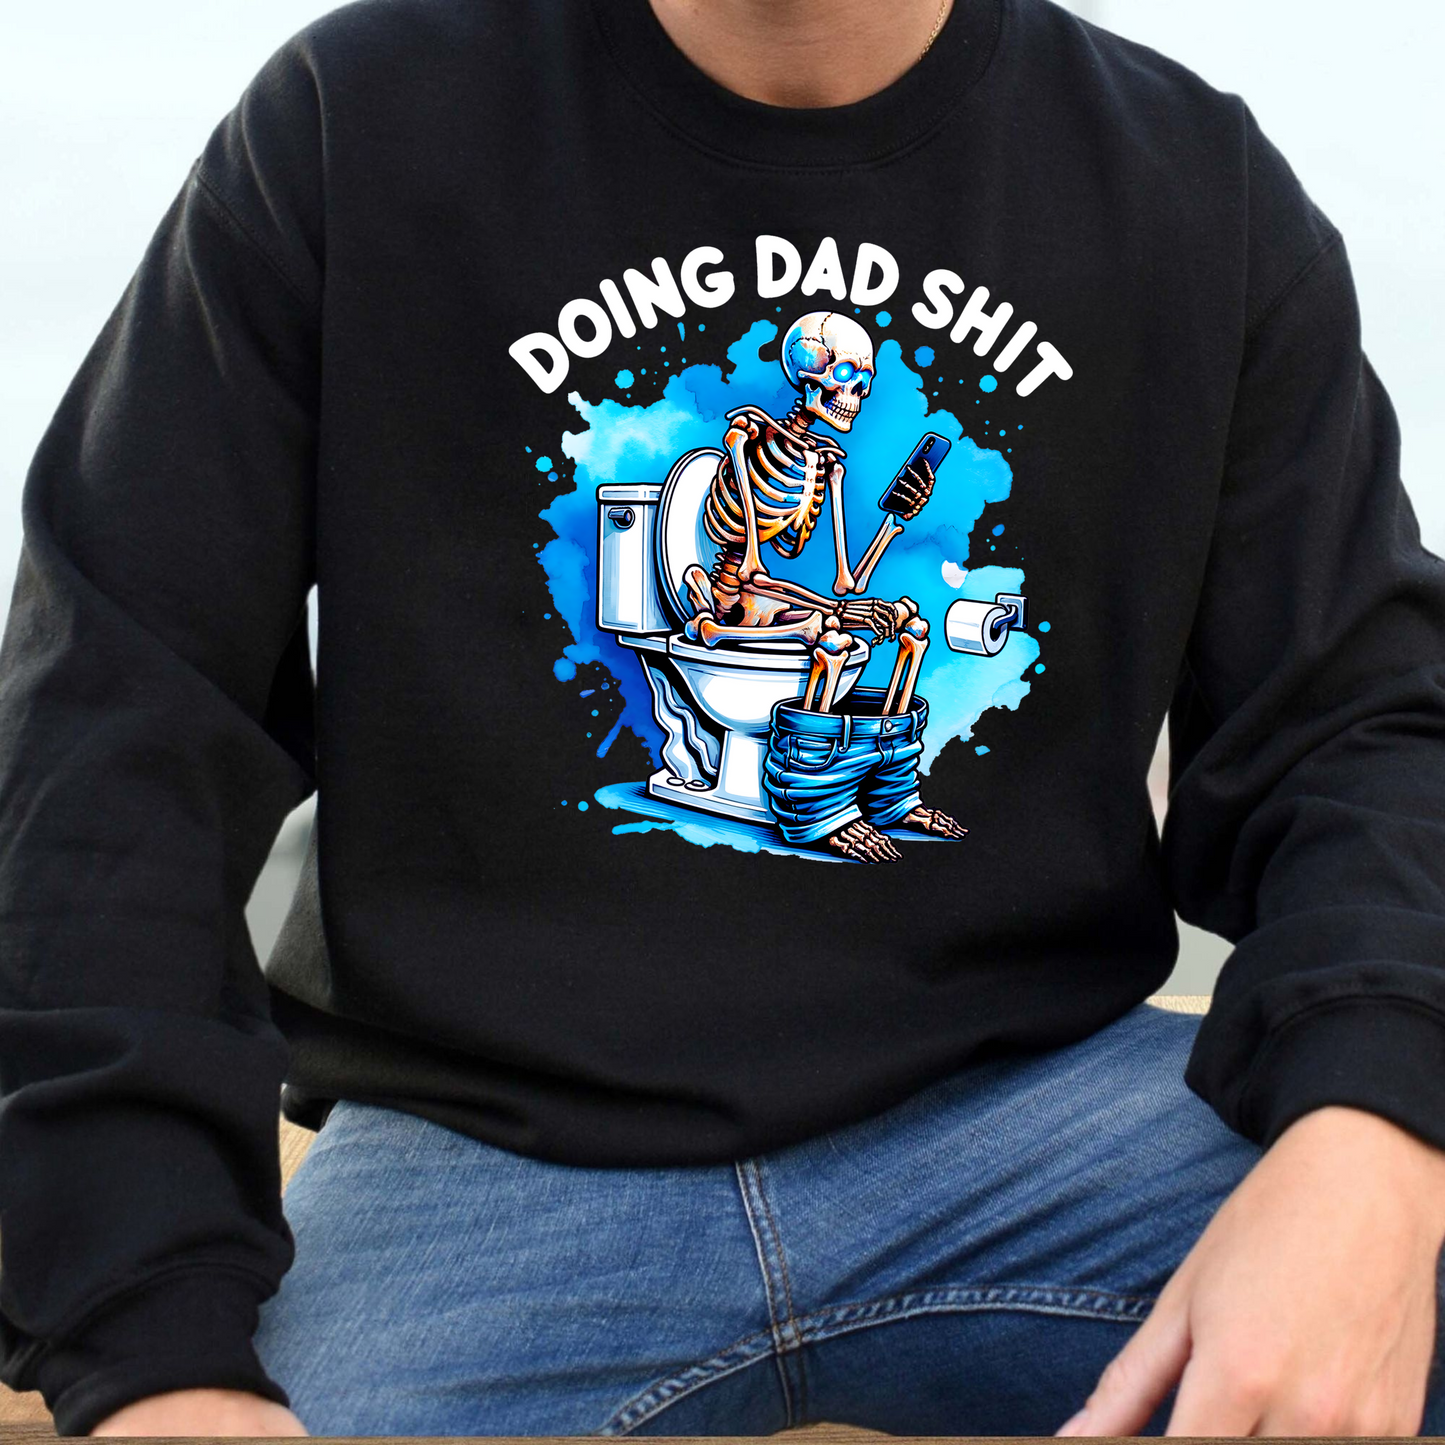 Doing Dad Shit Skeleton, Funny Father's Day Gift for Dads